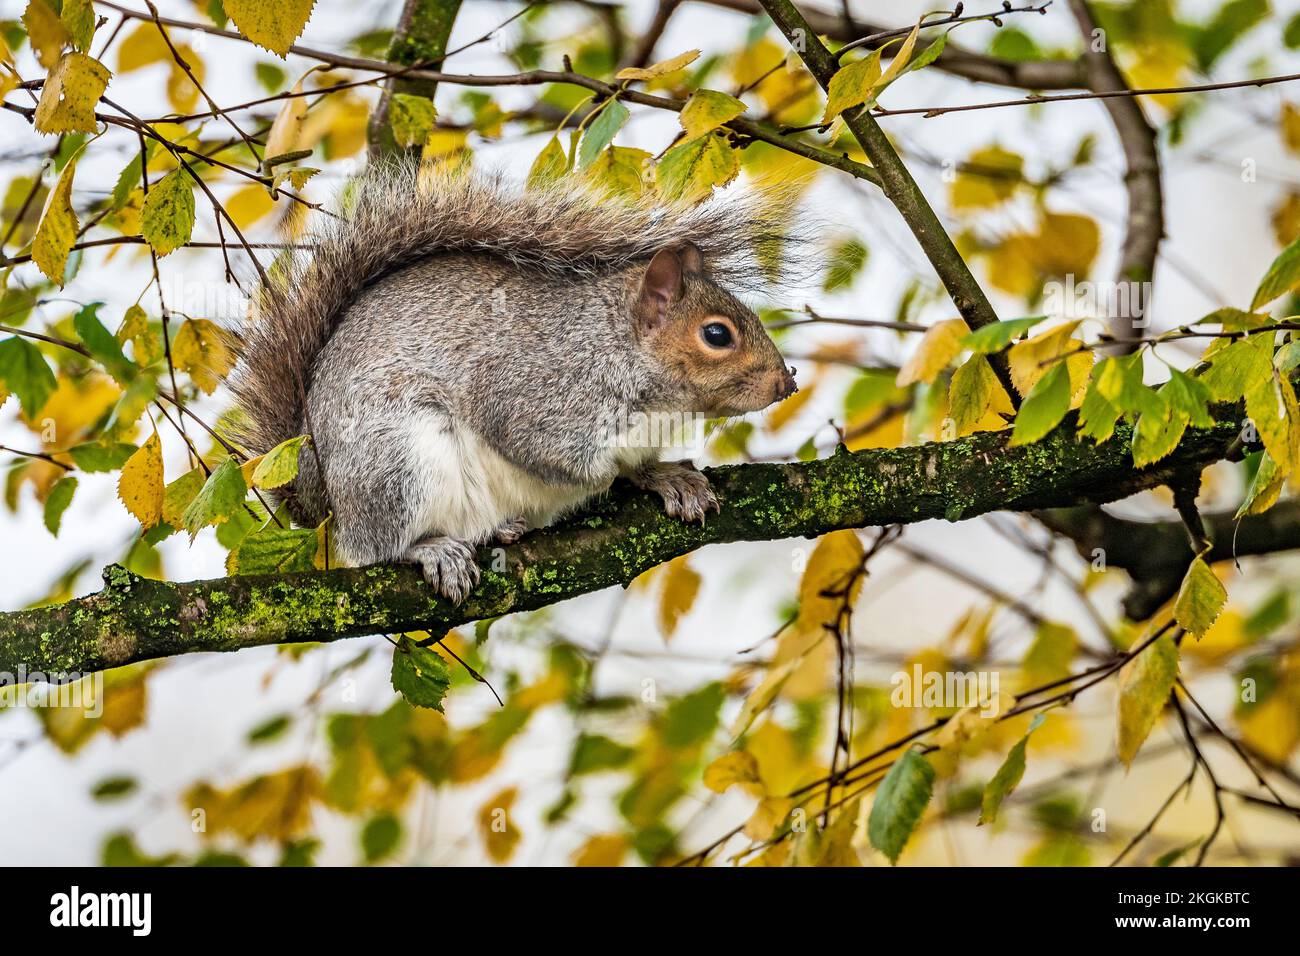 Gret squirrel roosting on a branch in an autumn coloured tree. Stock Photo